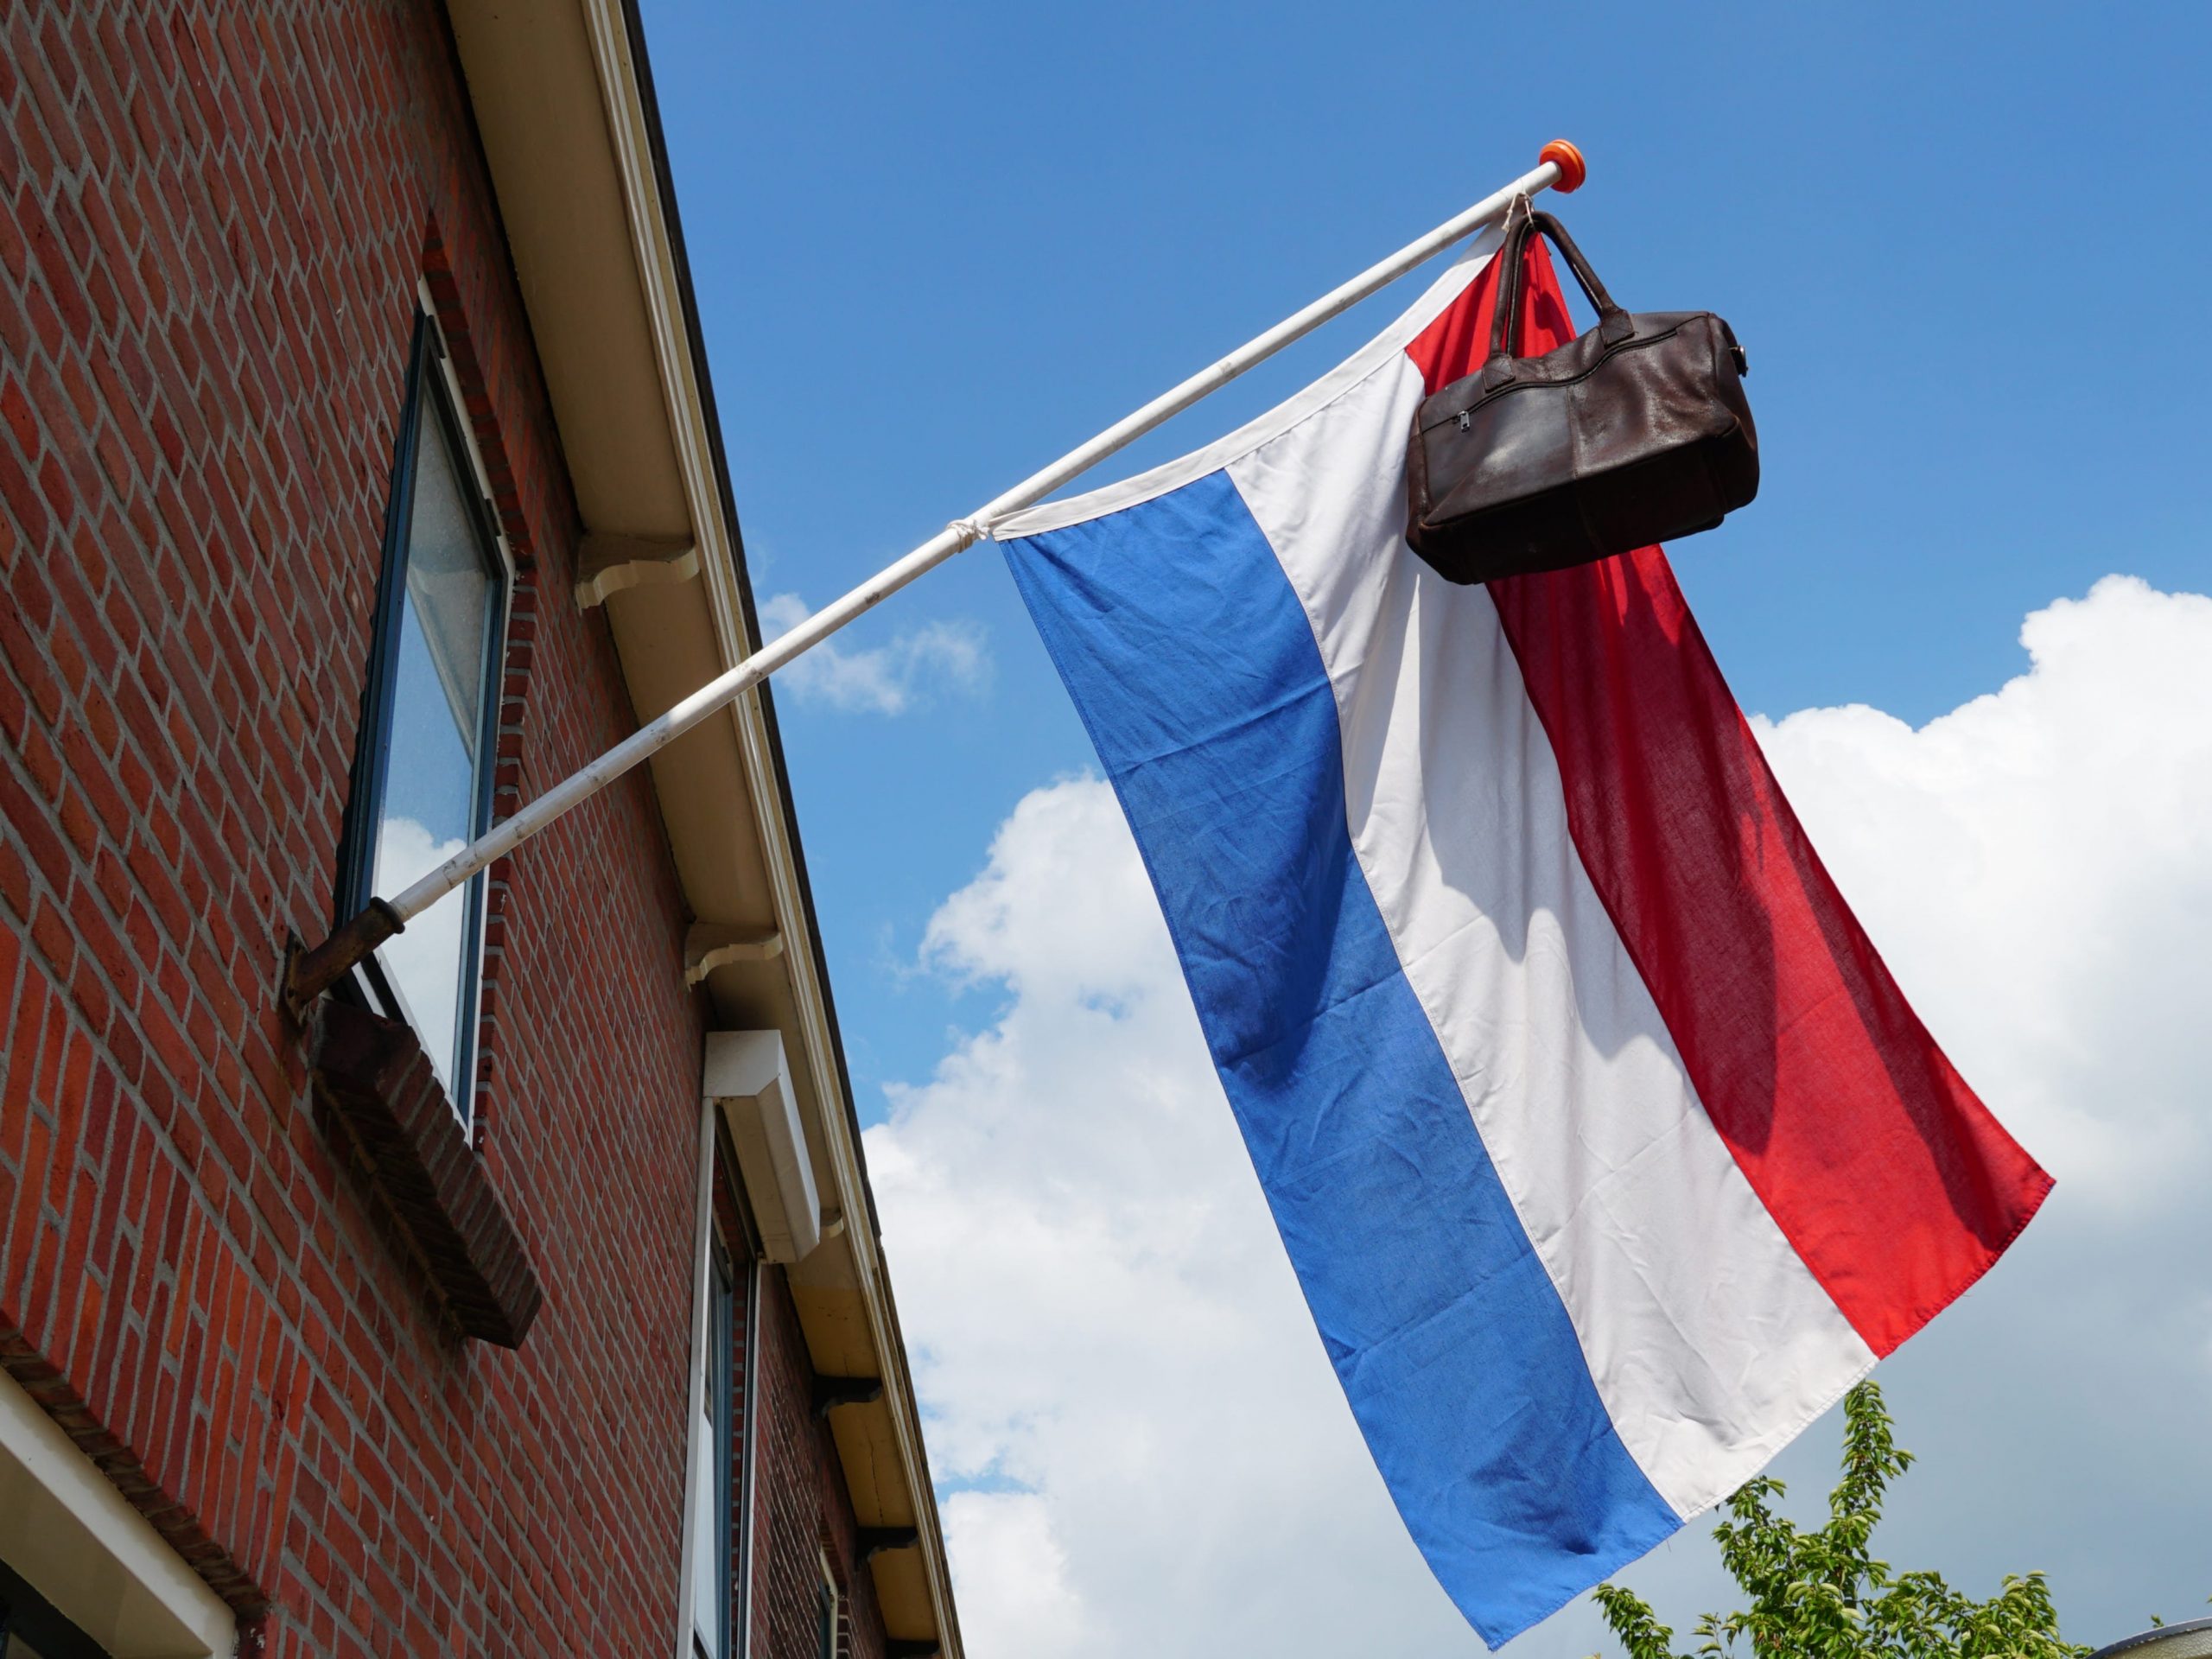 Official Dutch flag with a school bag, a tradition in the Netherlands when a student graduates.